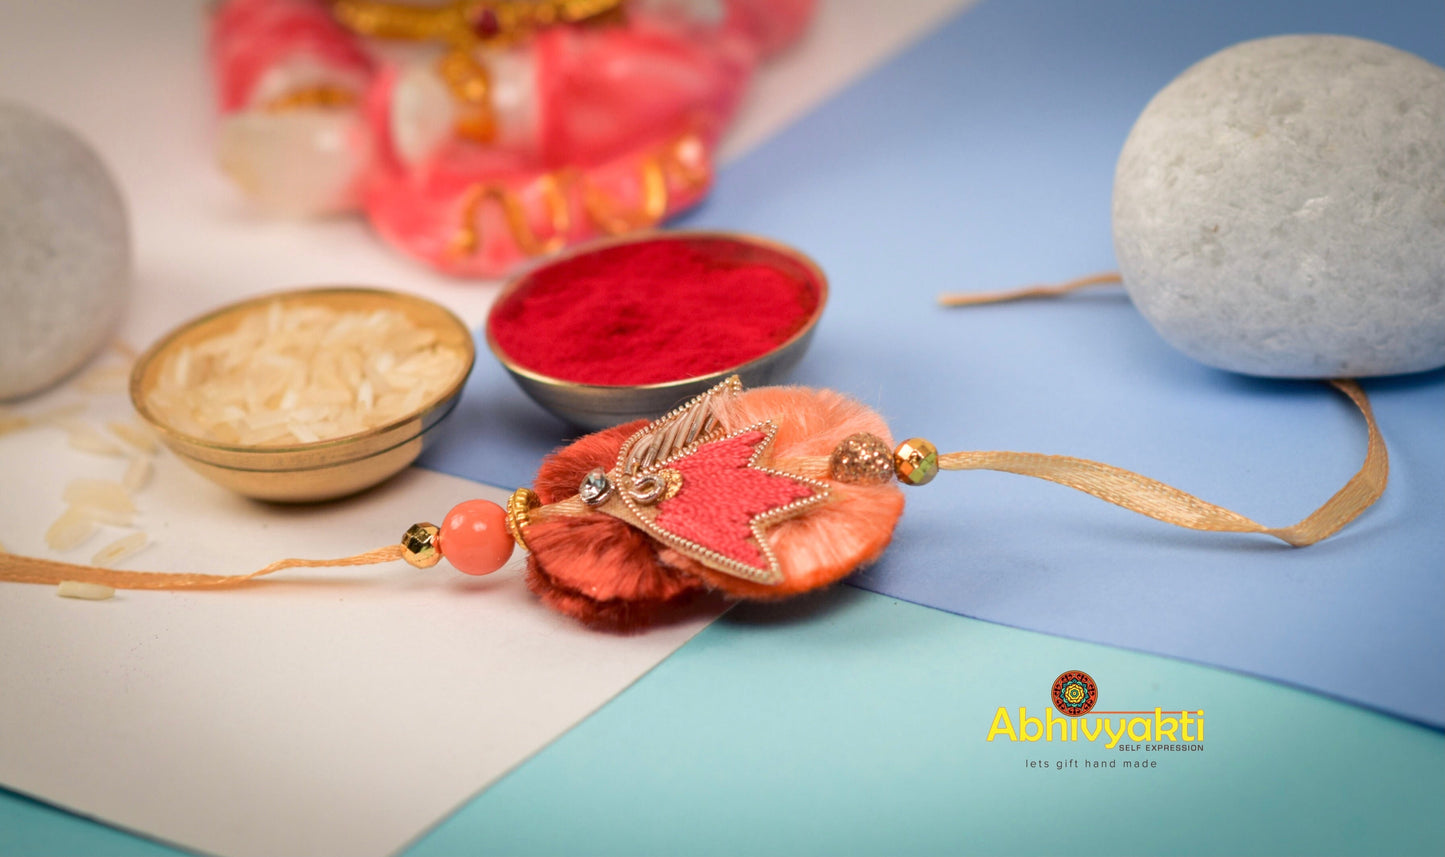 Rakhi with stones and beads, a traditional symbol of love and sibling bond.